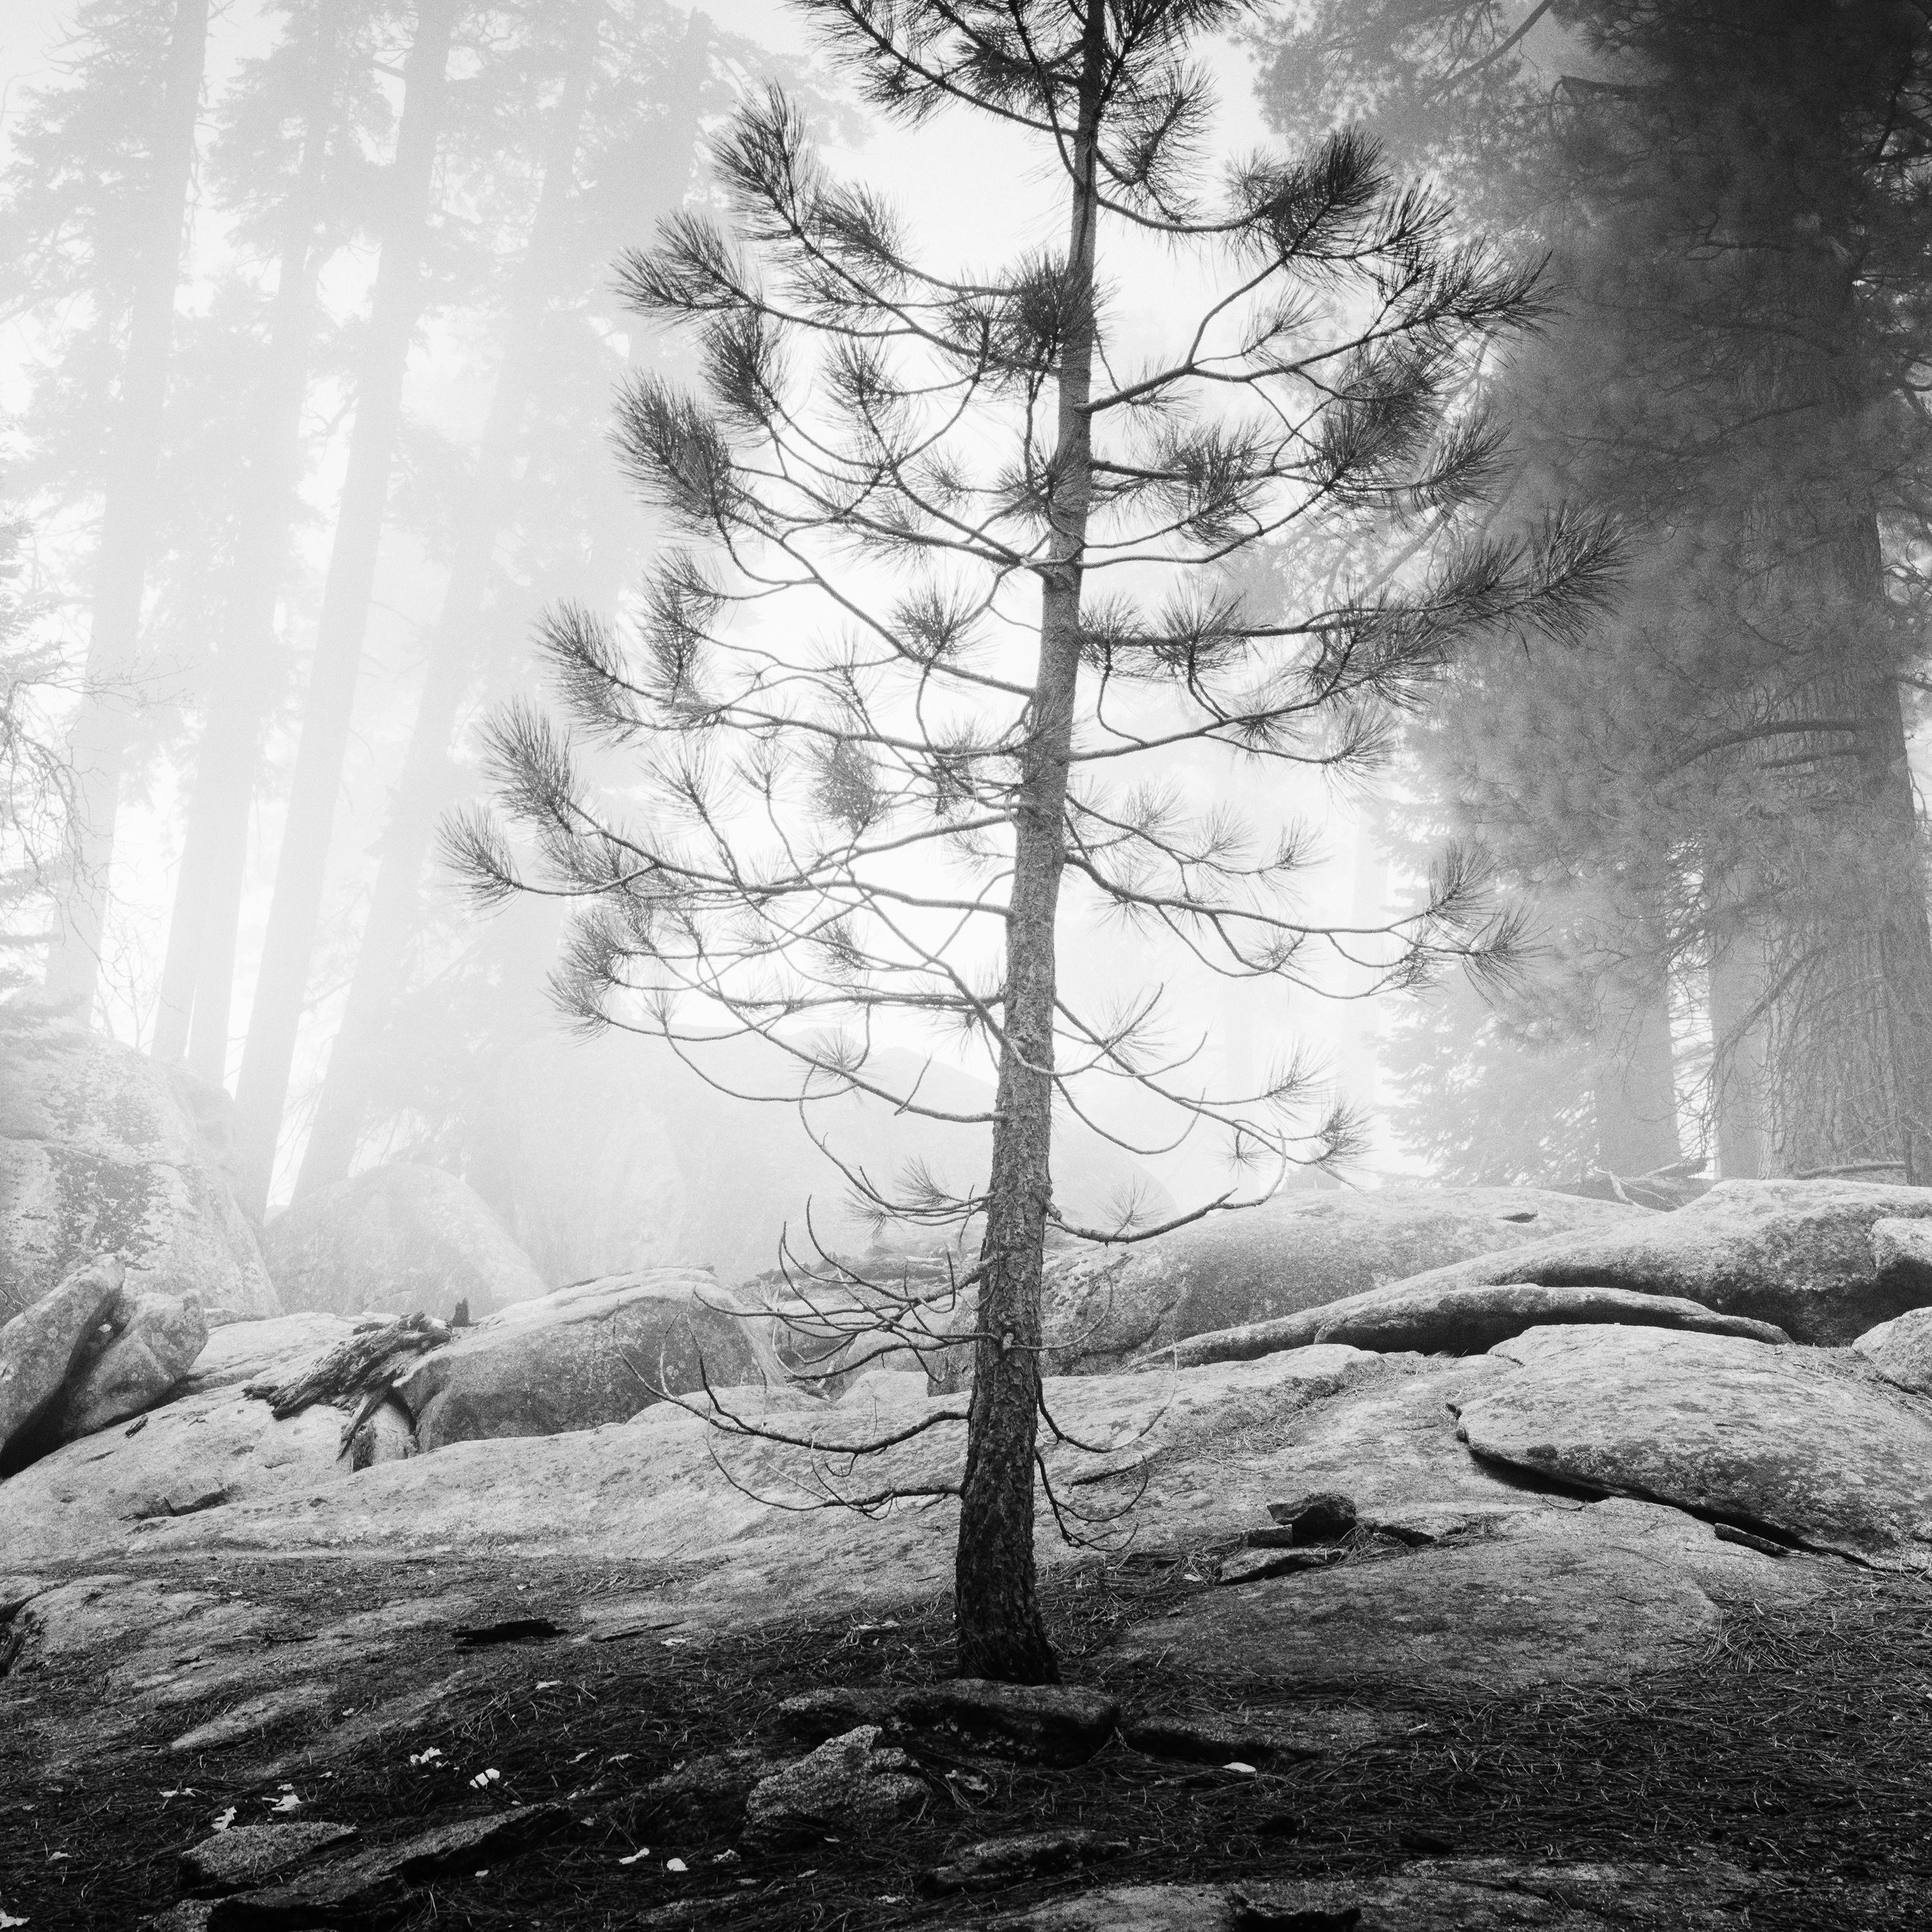 Black and White Fine Art Landscape Photography. Redwood Tree and Forest in Fog, National Park, California, USA. Archival pigment ink print, edition of 9. Signed, titled, dated and numbered by artist. Certificate of authenticity included. Printed